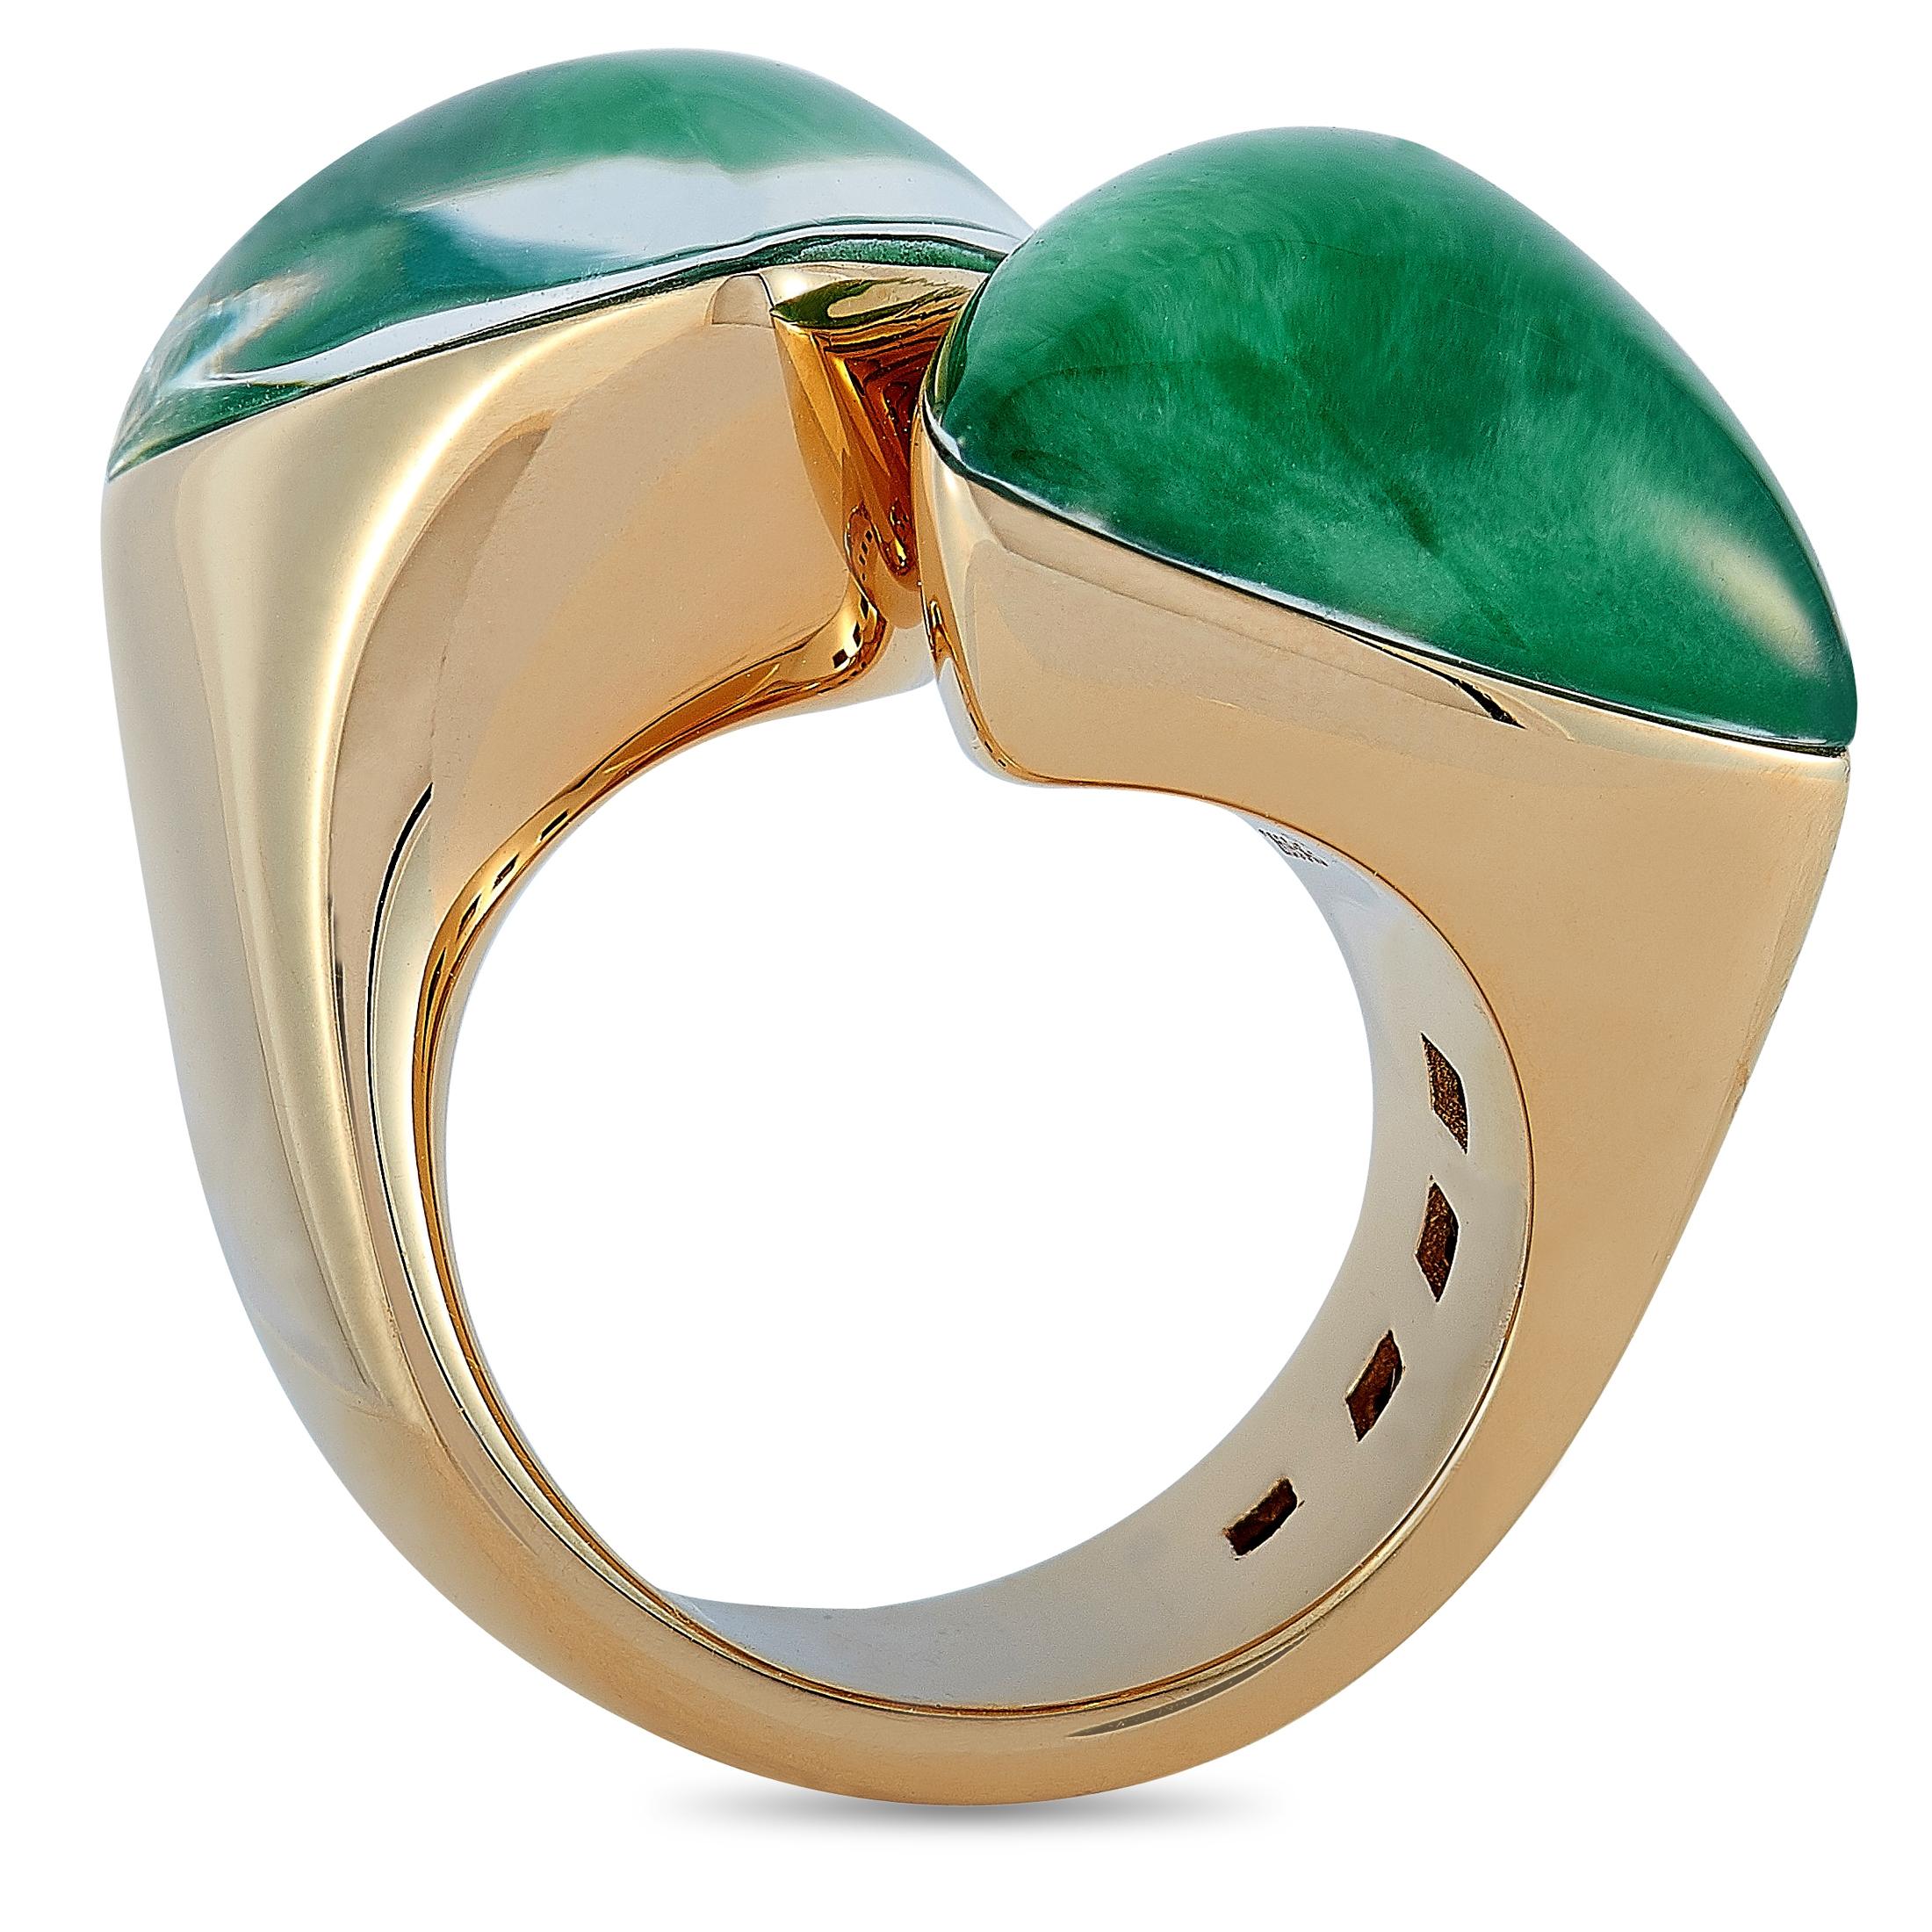 The Vhernier “Freccia” ring is made of 18K rose gold and embellished with jade and rock crystal. The ring weighs 18 grams and boasts band thickness of 9 mm and top height of 11 mm, while top dimensions measure 32 by 20 mm.
Ring Size: 6

This item is